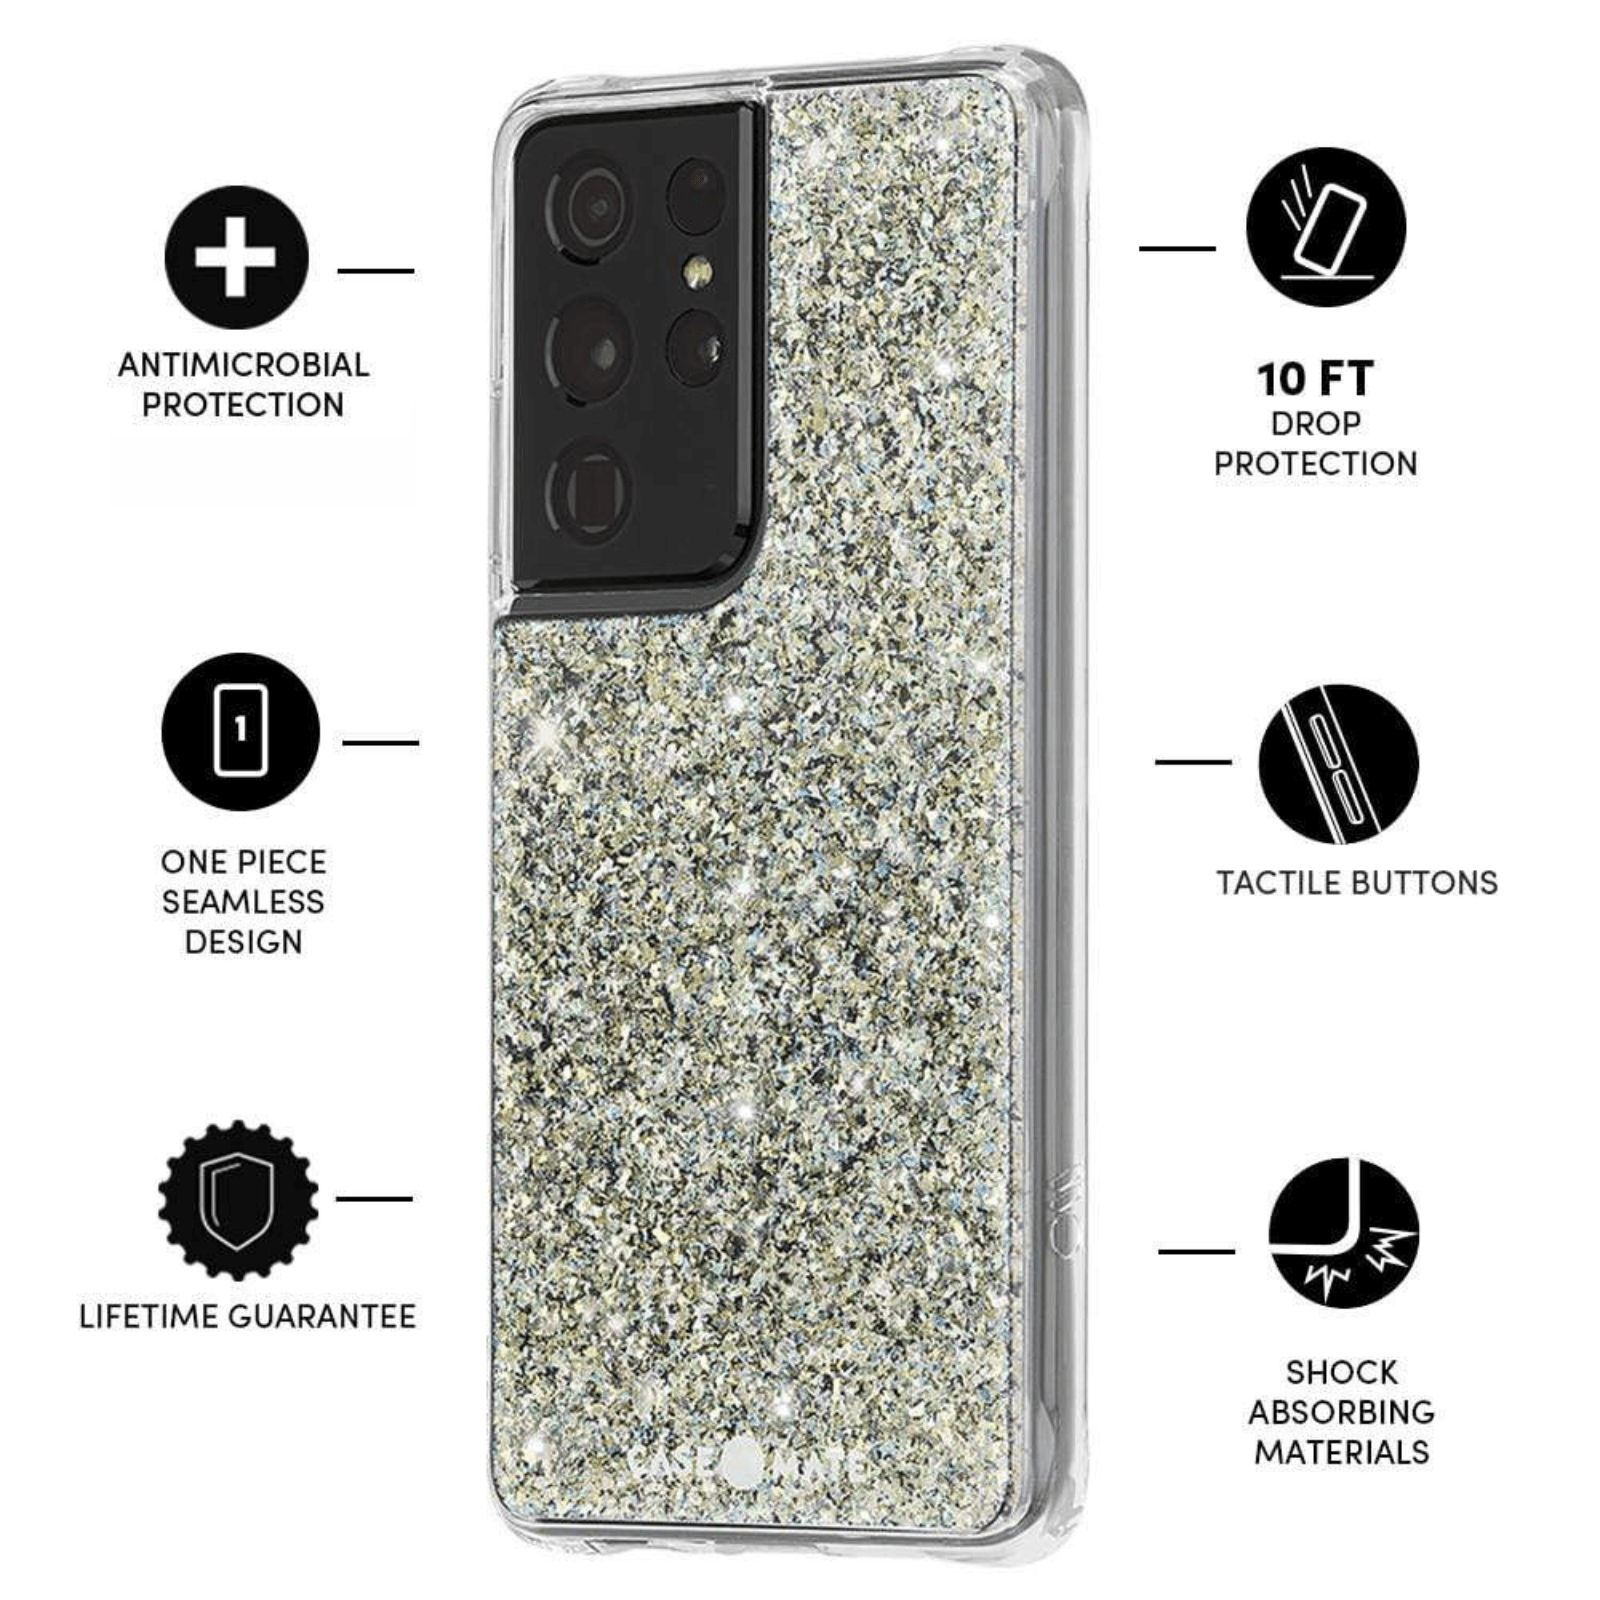 Features Antimicrobial Protection, One Piece Seamless Design, Lifetime Guarantee, 10 FT Drop Protection, Tactile Buttons. Shock Absorbing Materials. color::Twinkle Stardust